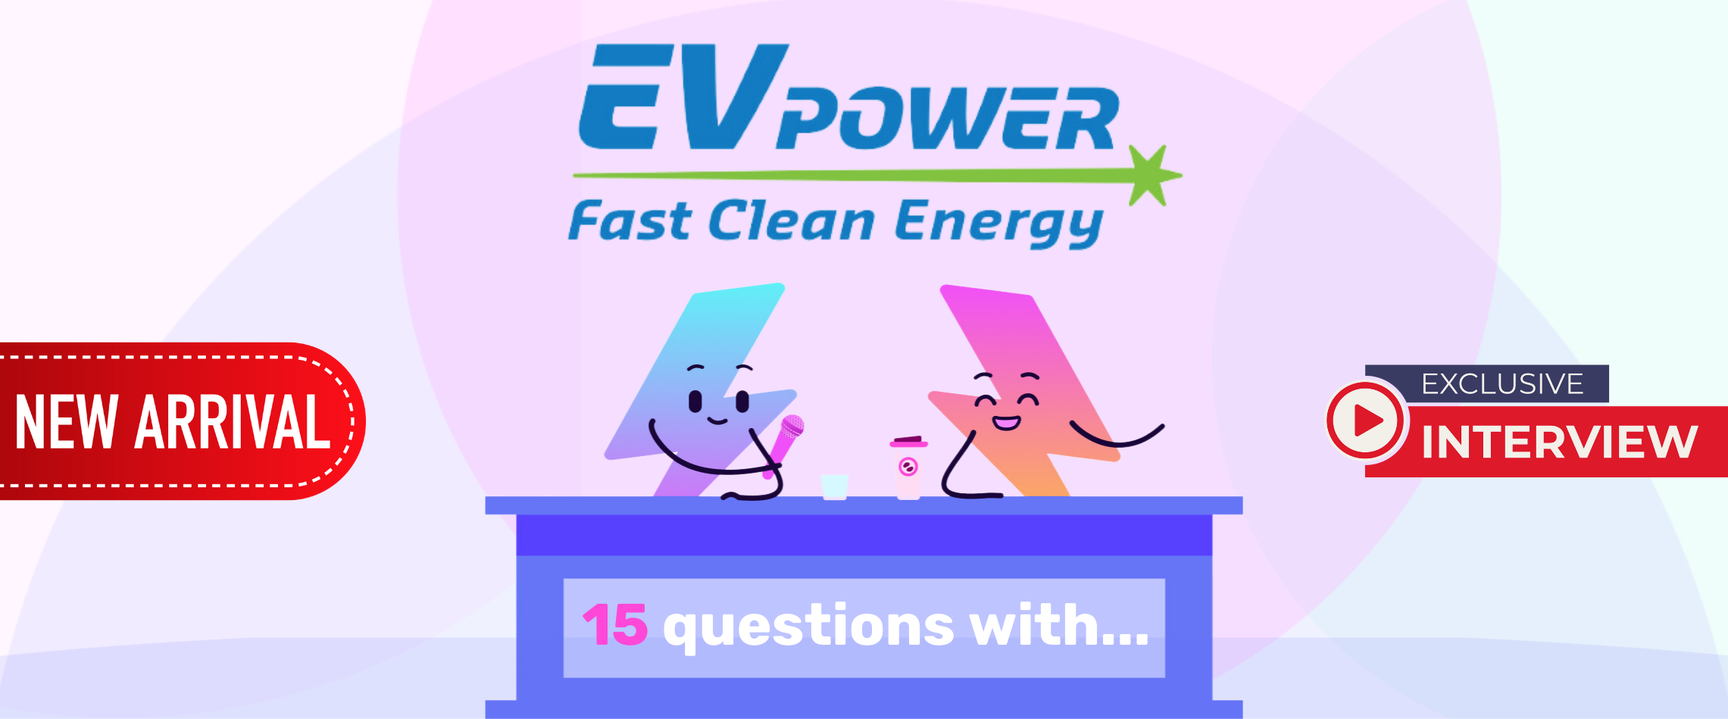 octopus electroverse interview header image with MFG EV Power logo